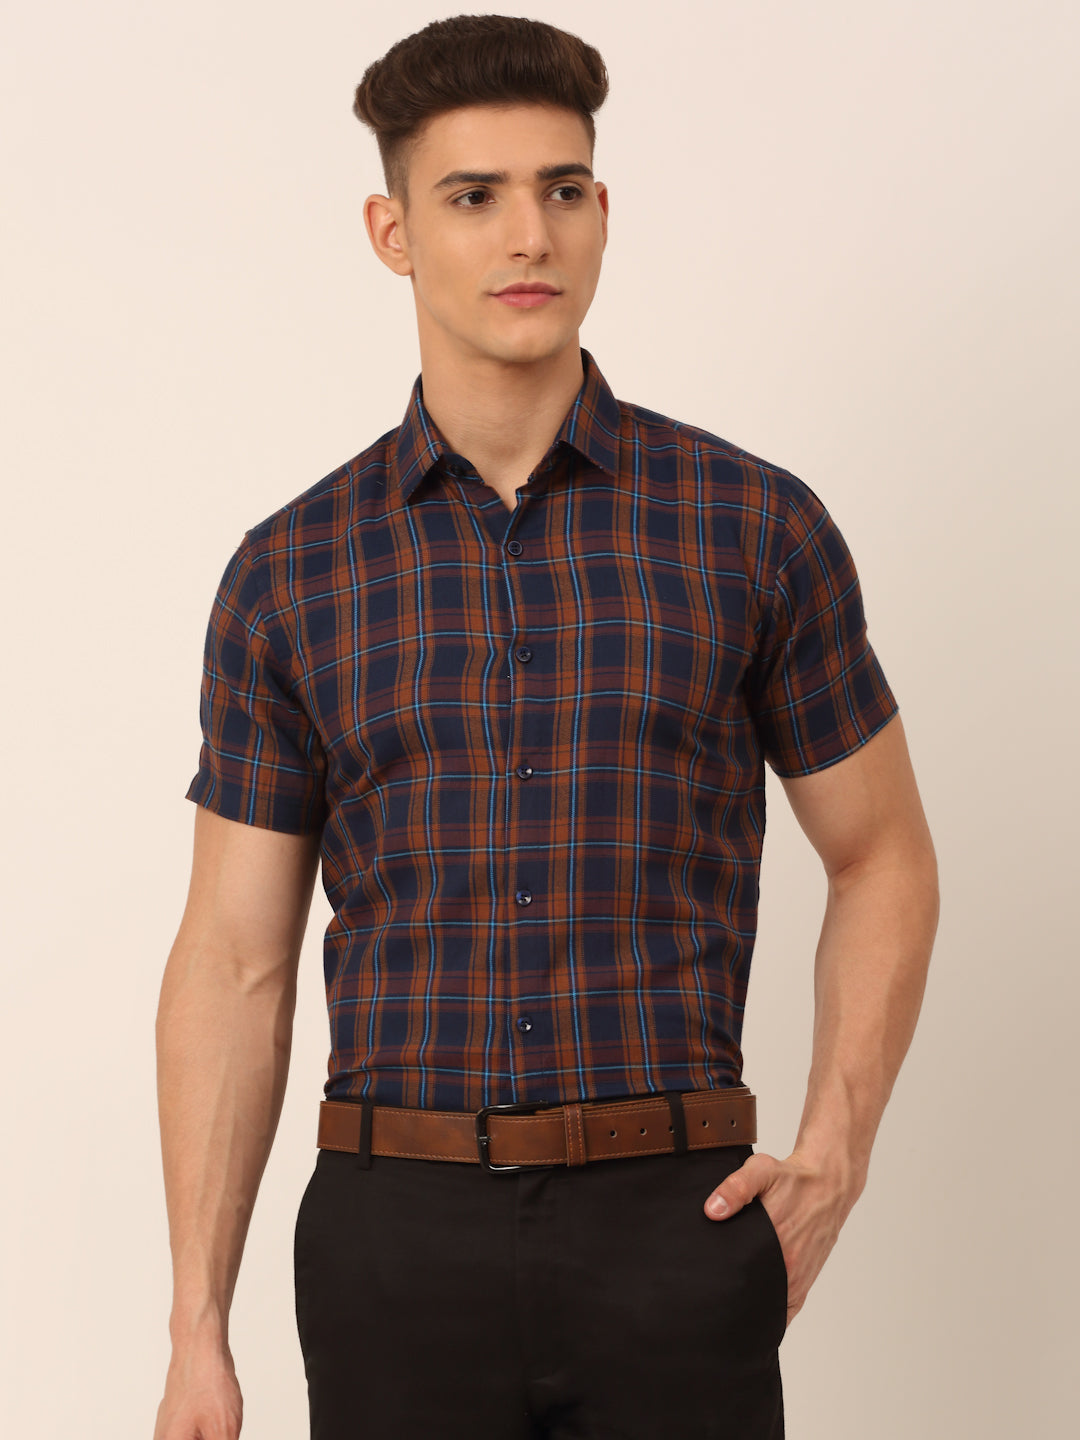 Men's Cotton Checked Half Sleeves Formal Shirts